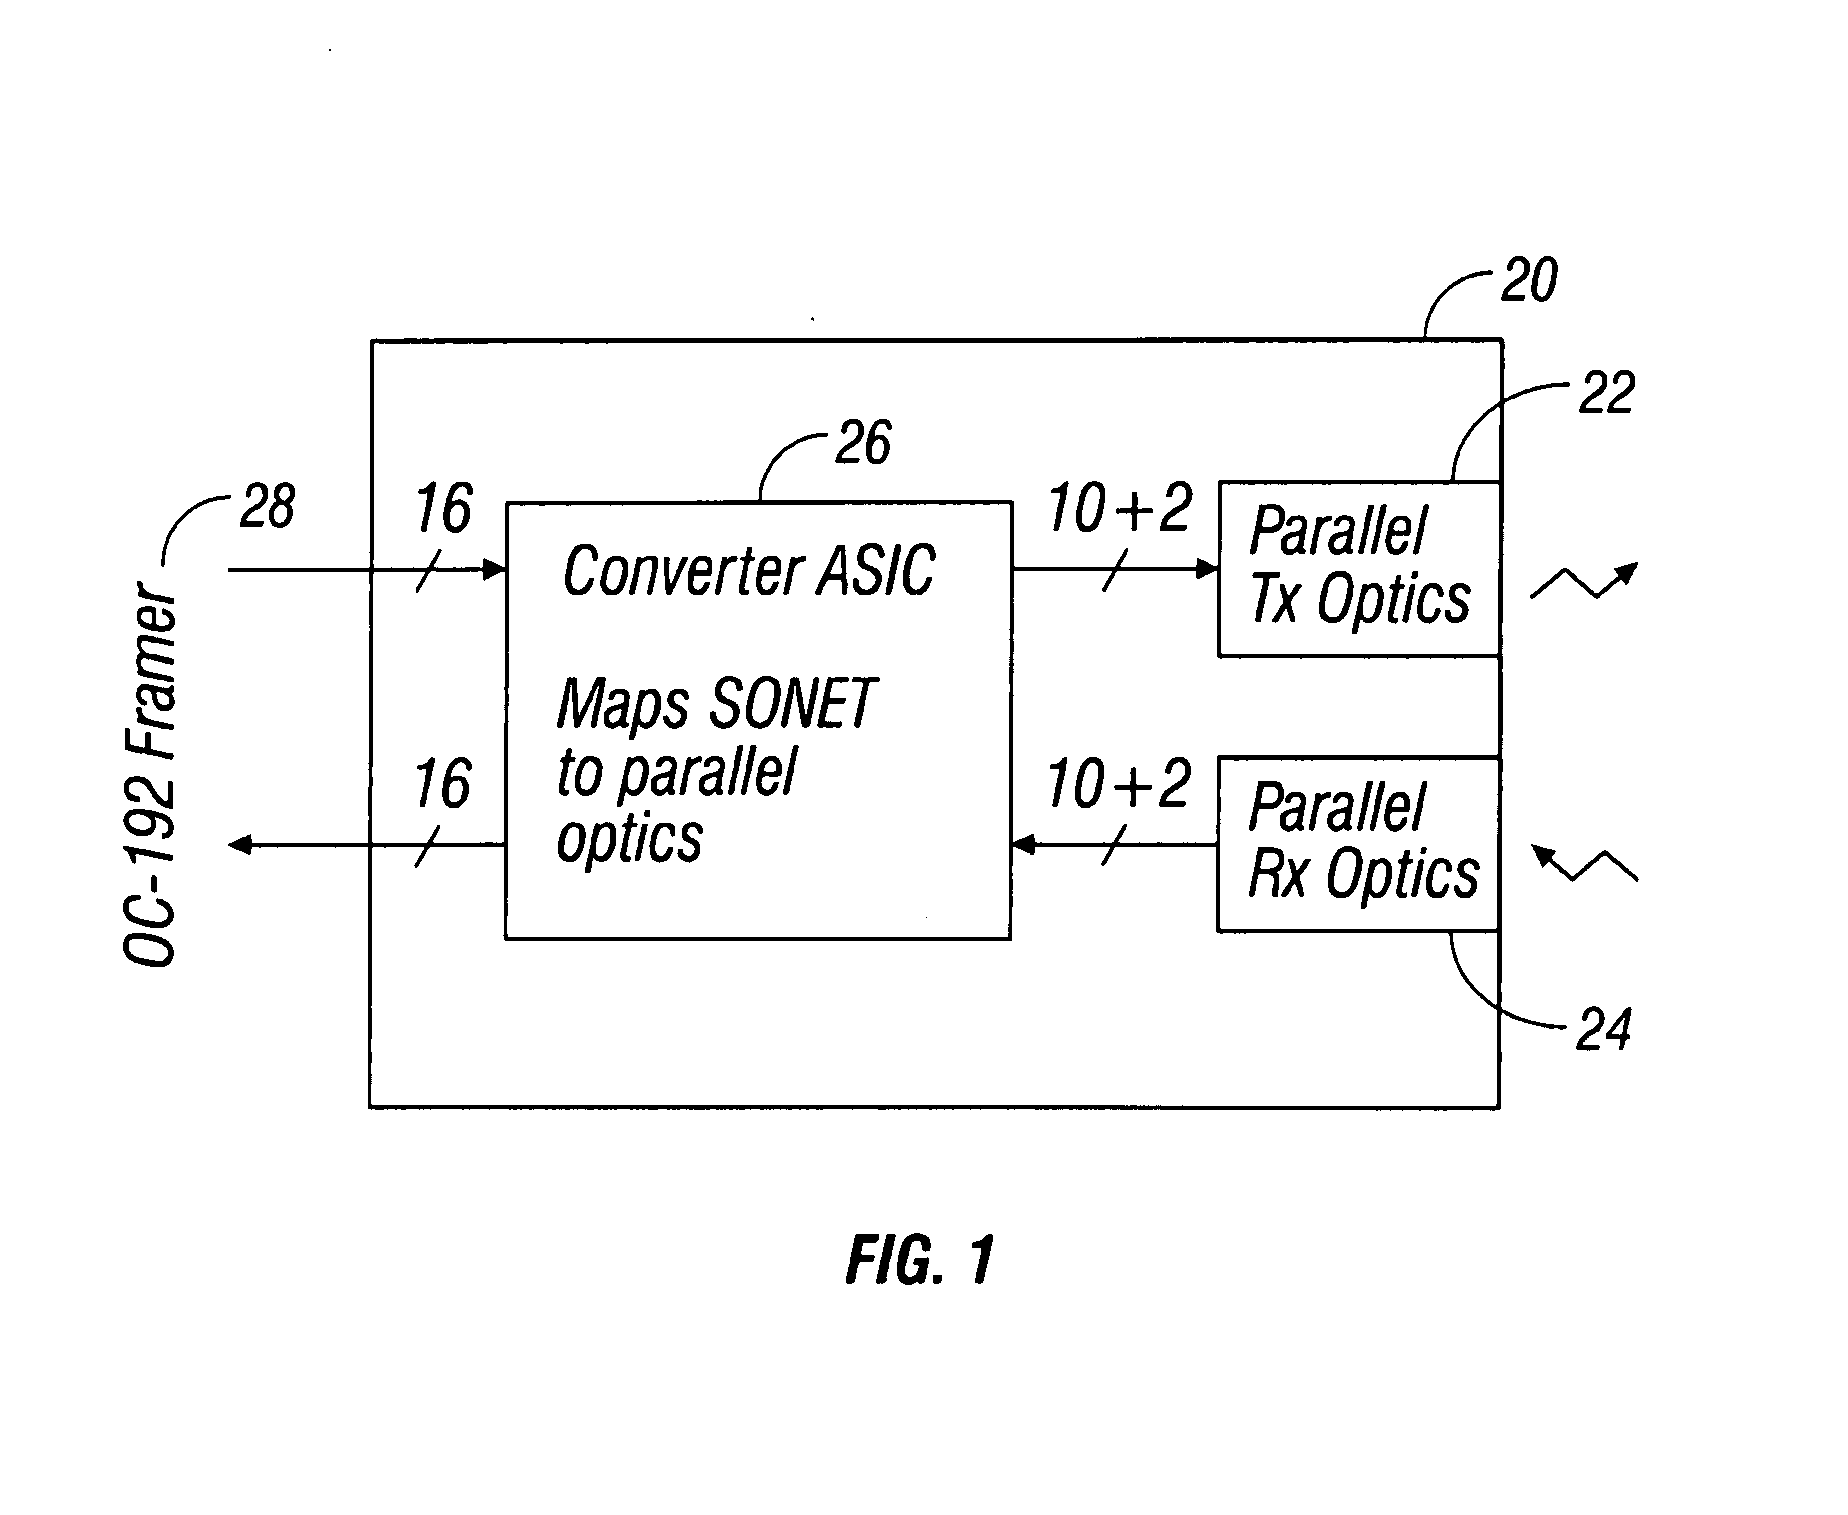 Method and apparatus for transferring synchronous optical network/synchronous digital hierarchy(SONET/SDH) frames on parallel transmission links